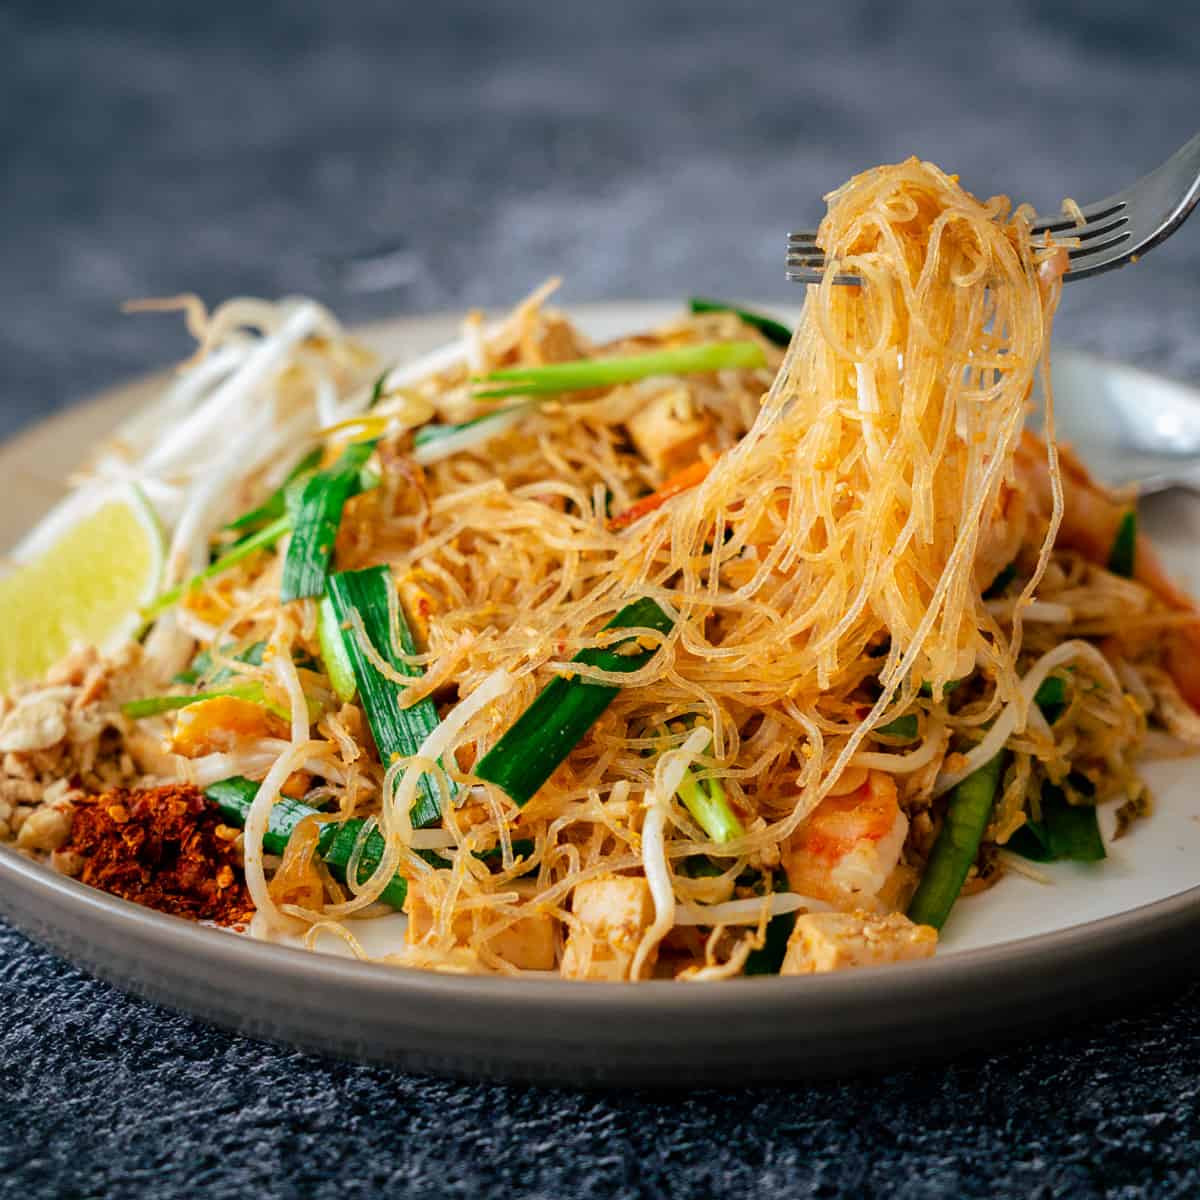 a plate of pad thai with with glass noodles with a fork picking up the noodles